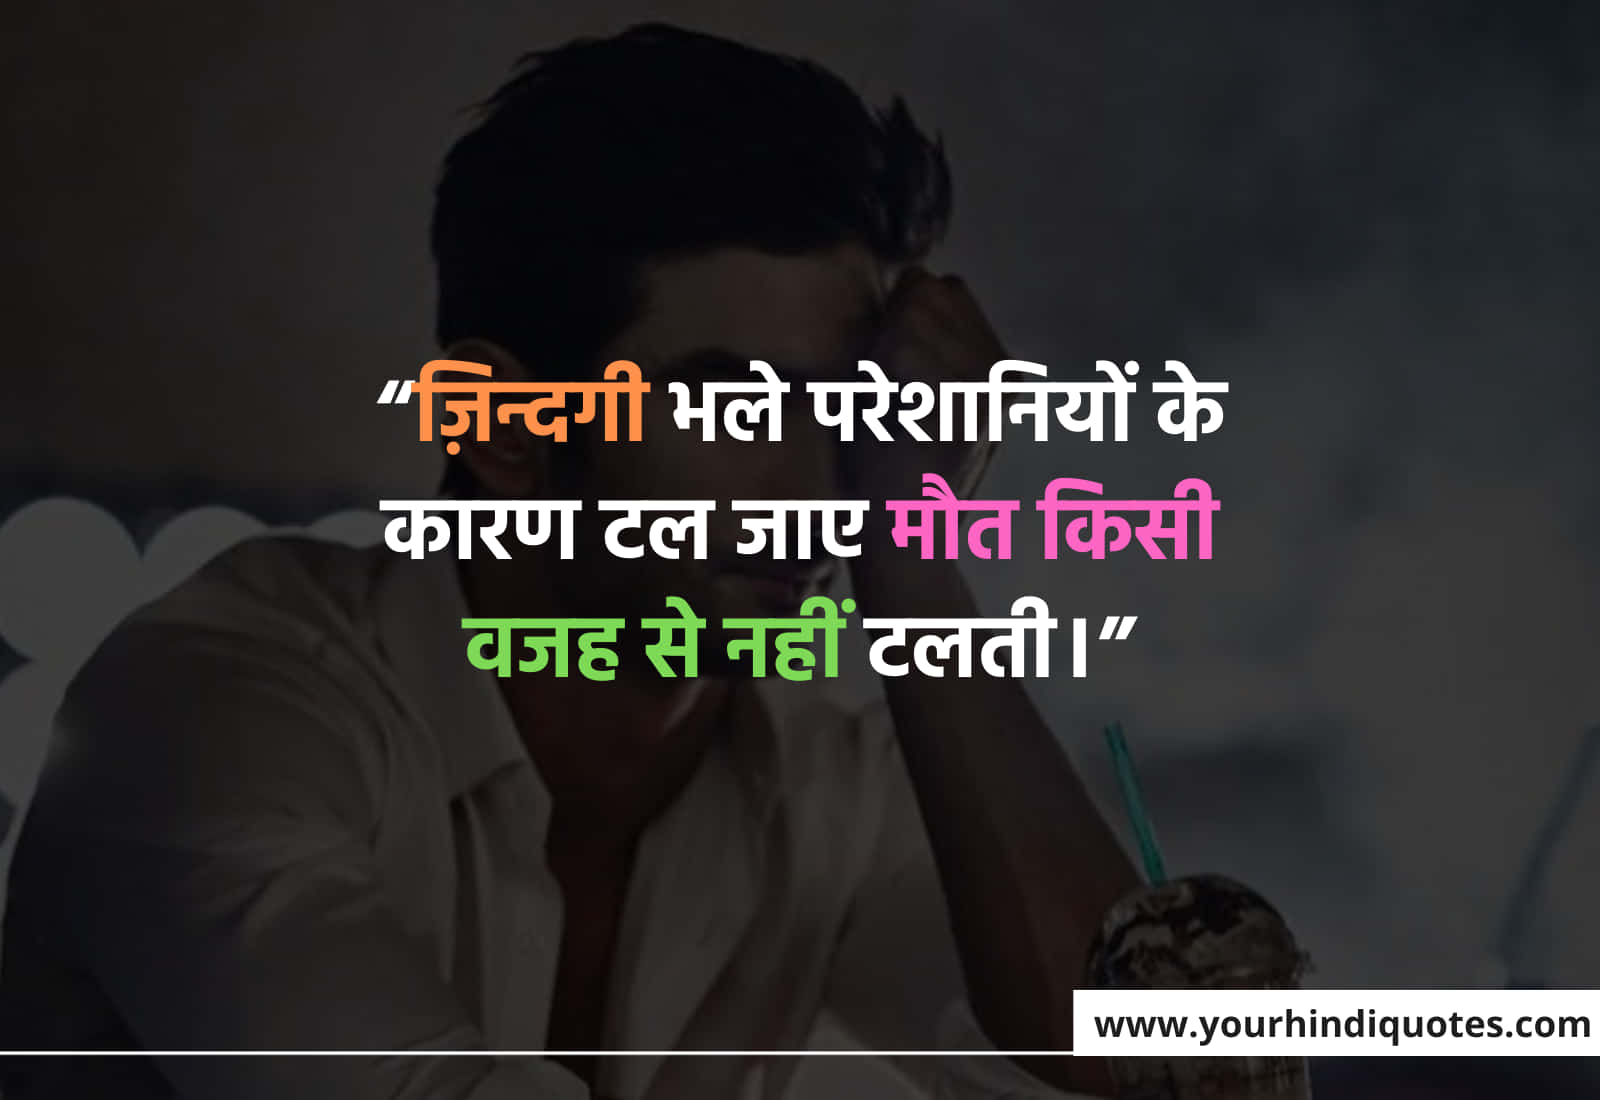 Best Sad Quotes for Death In Hindi